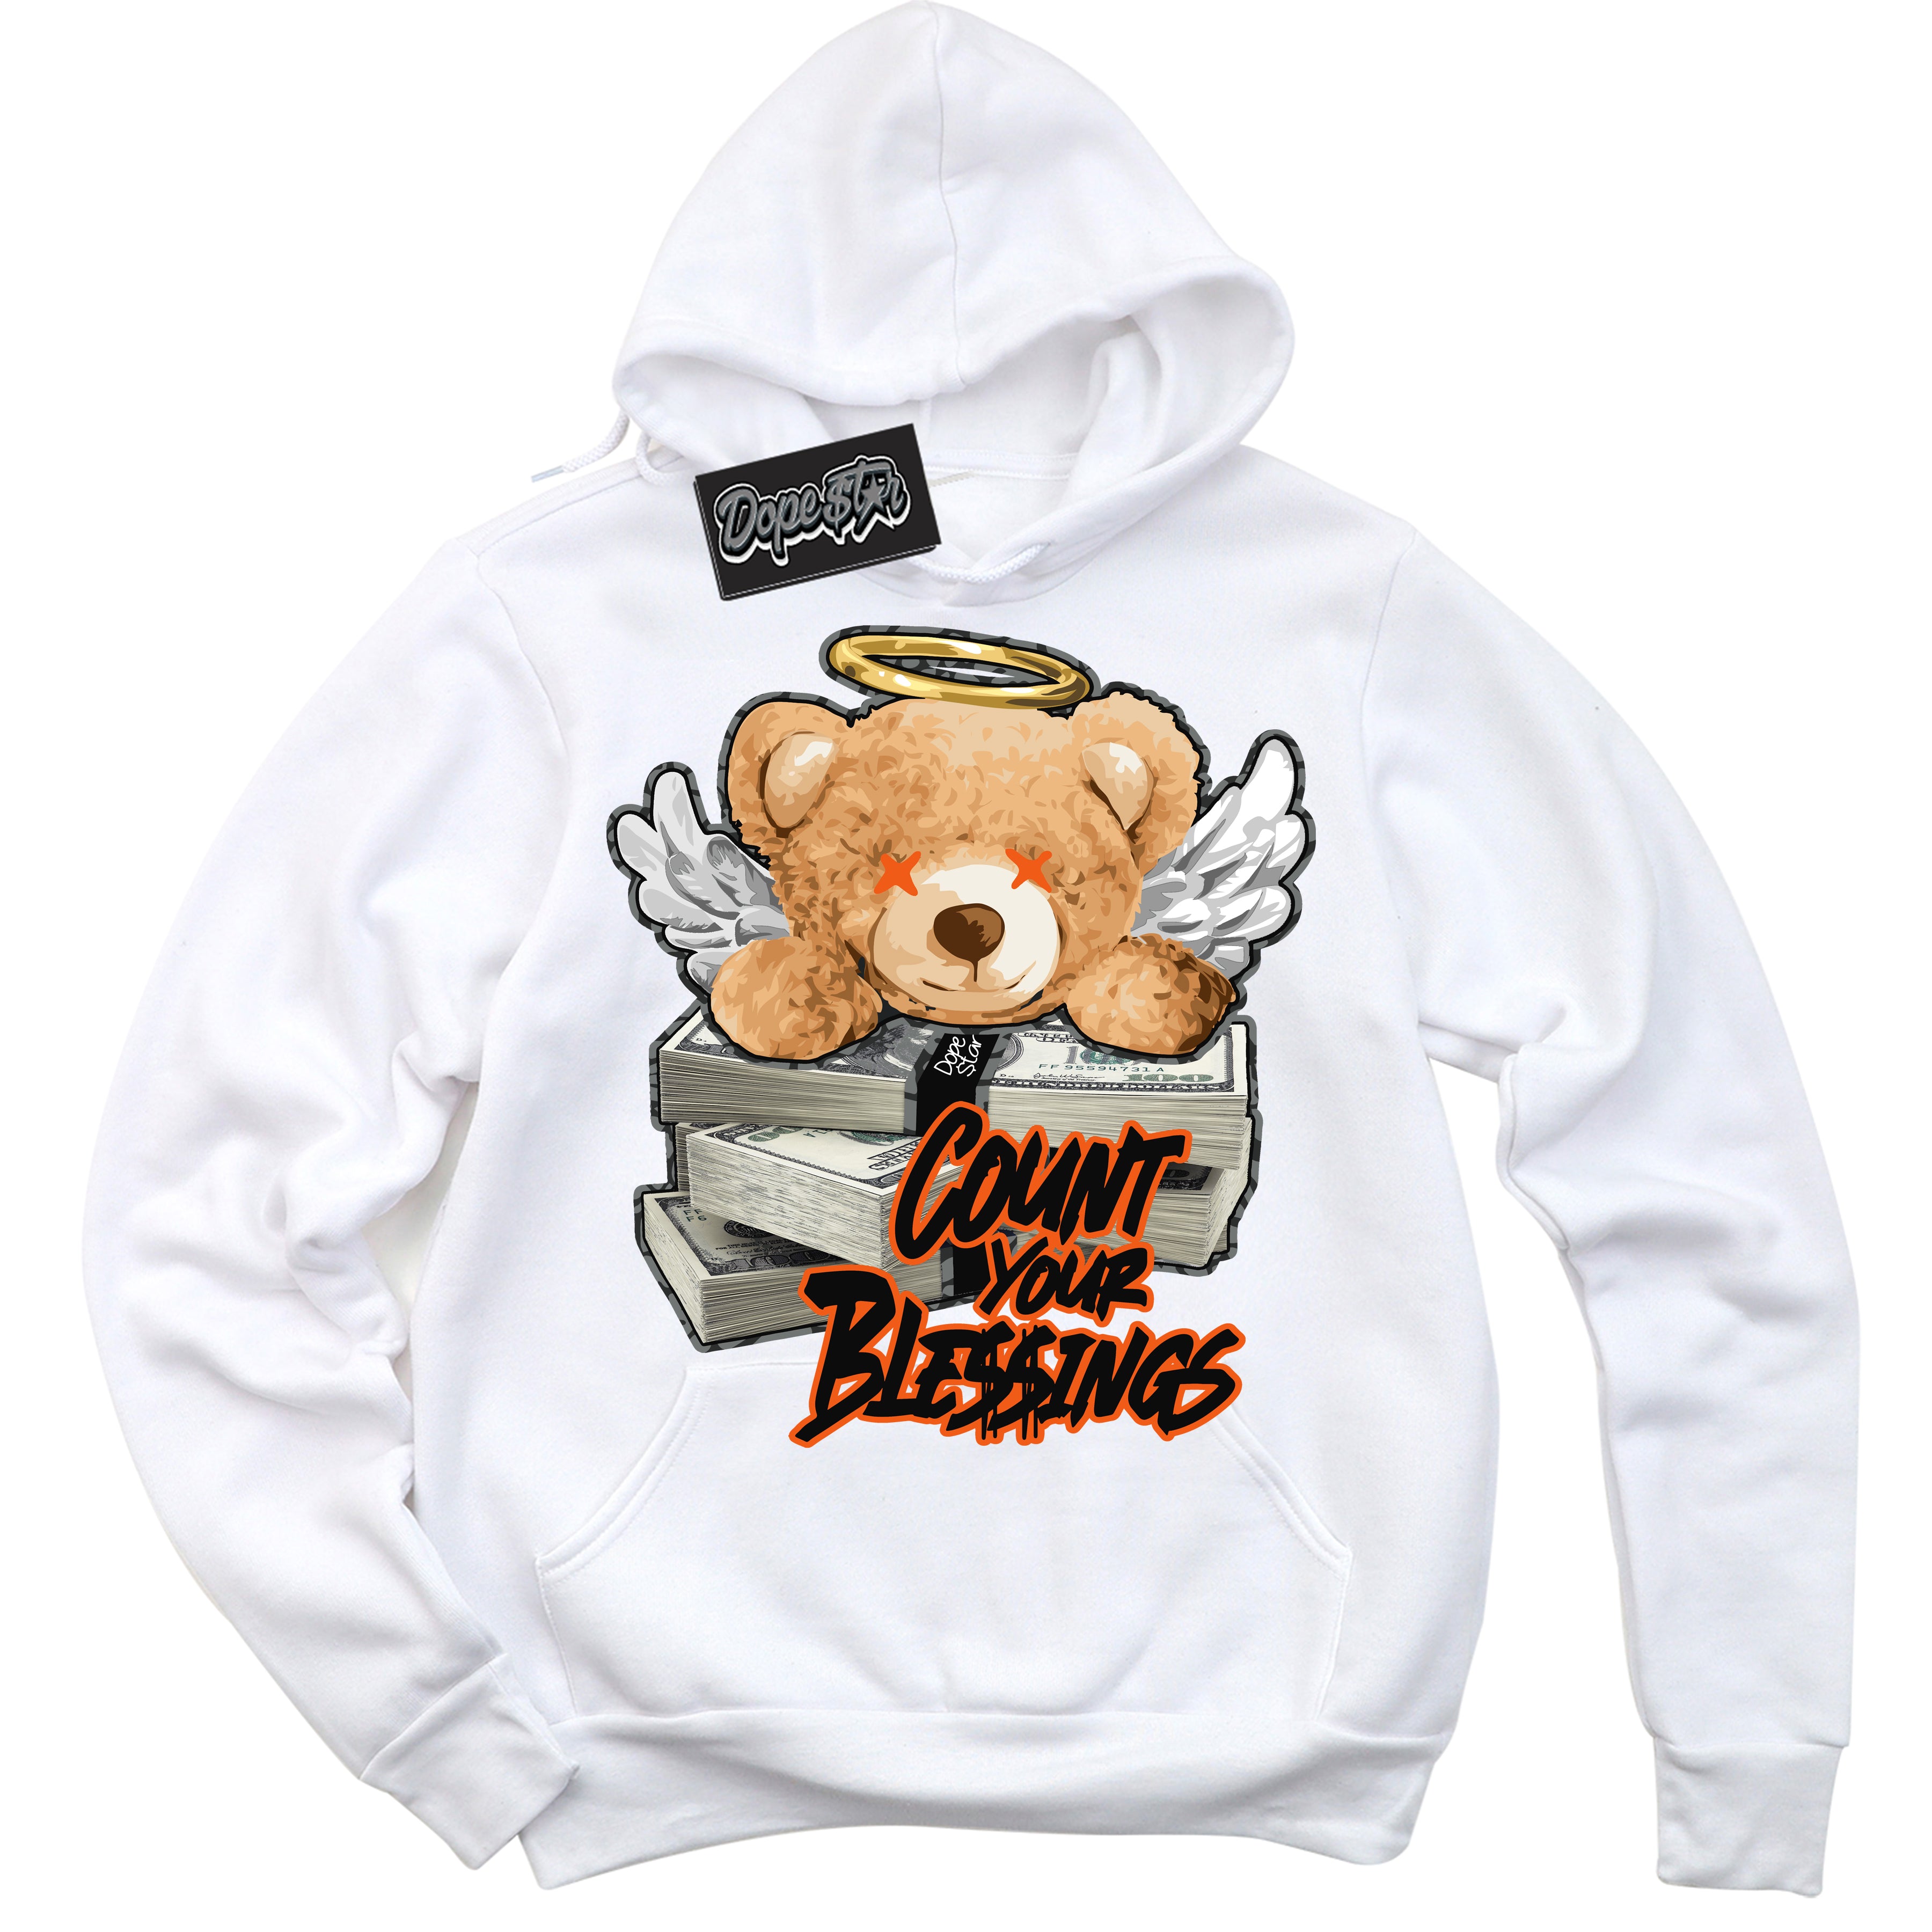 Cool White Graphic DopeStar Hoodie with “  Glow Count Your Blessings “ print, that perfectly matches Fear Pack 3s sneakers